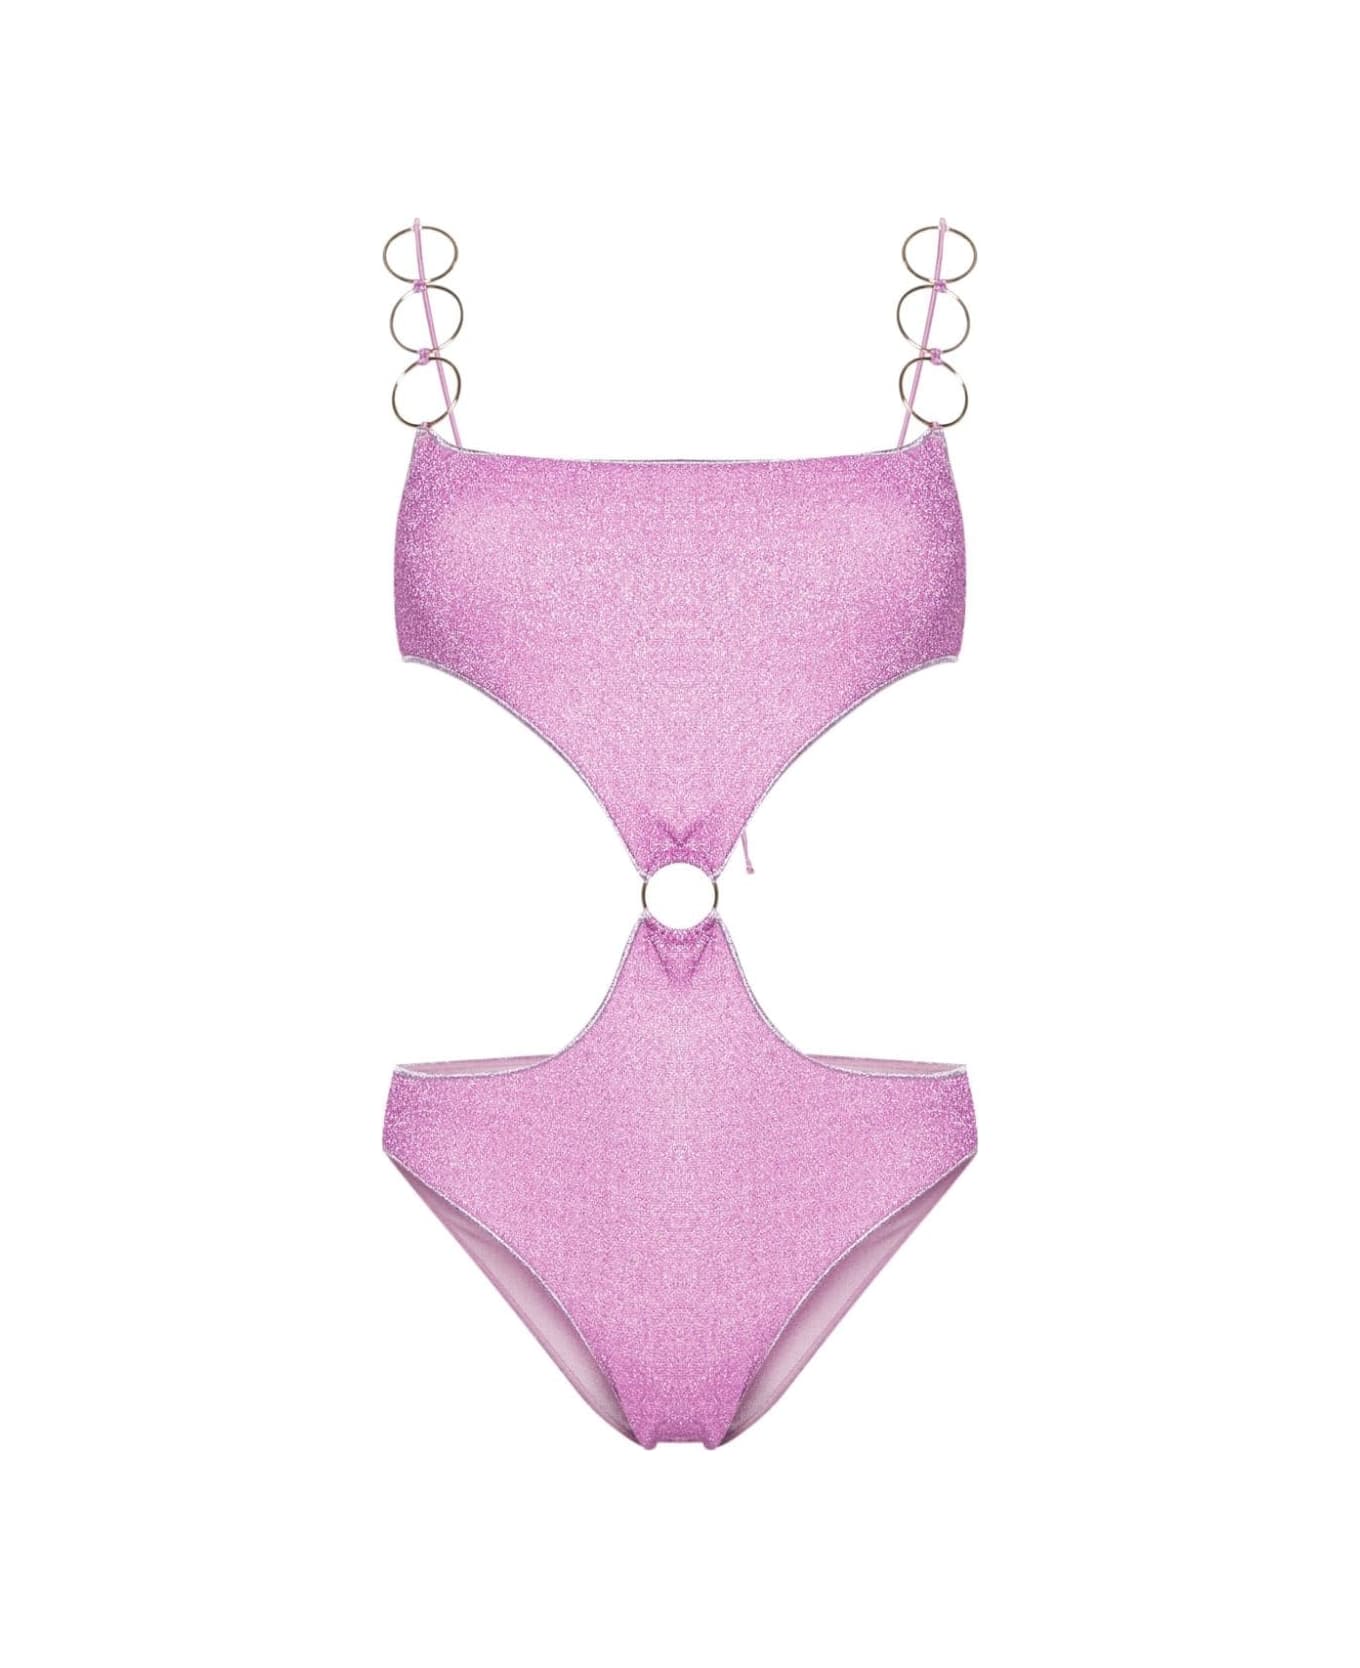 Oseree Wisteria Lumiere Ring Swimsuit - Purple ワンピース